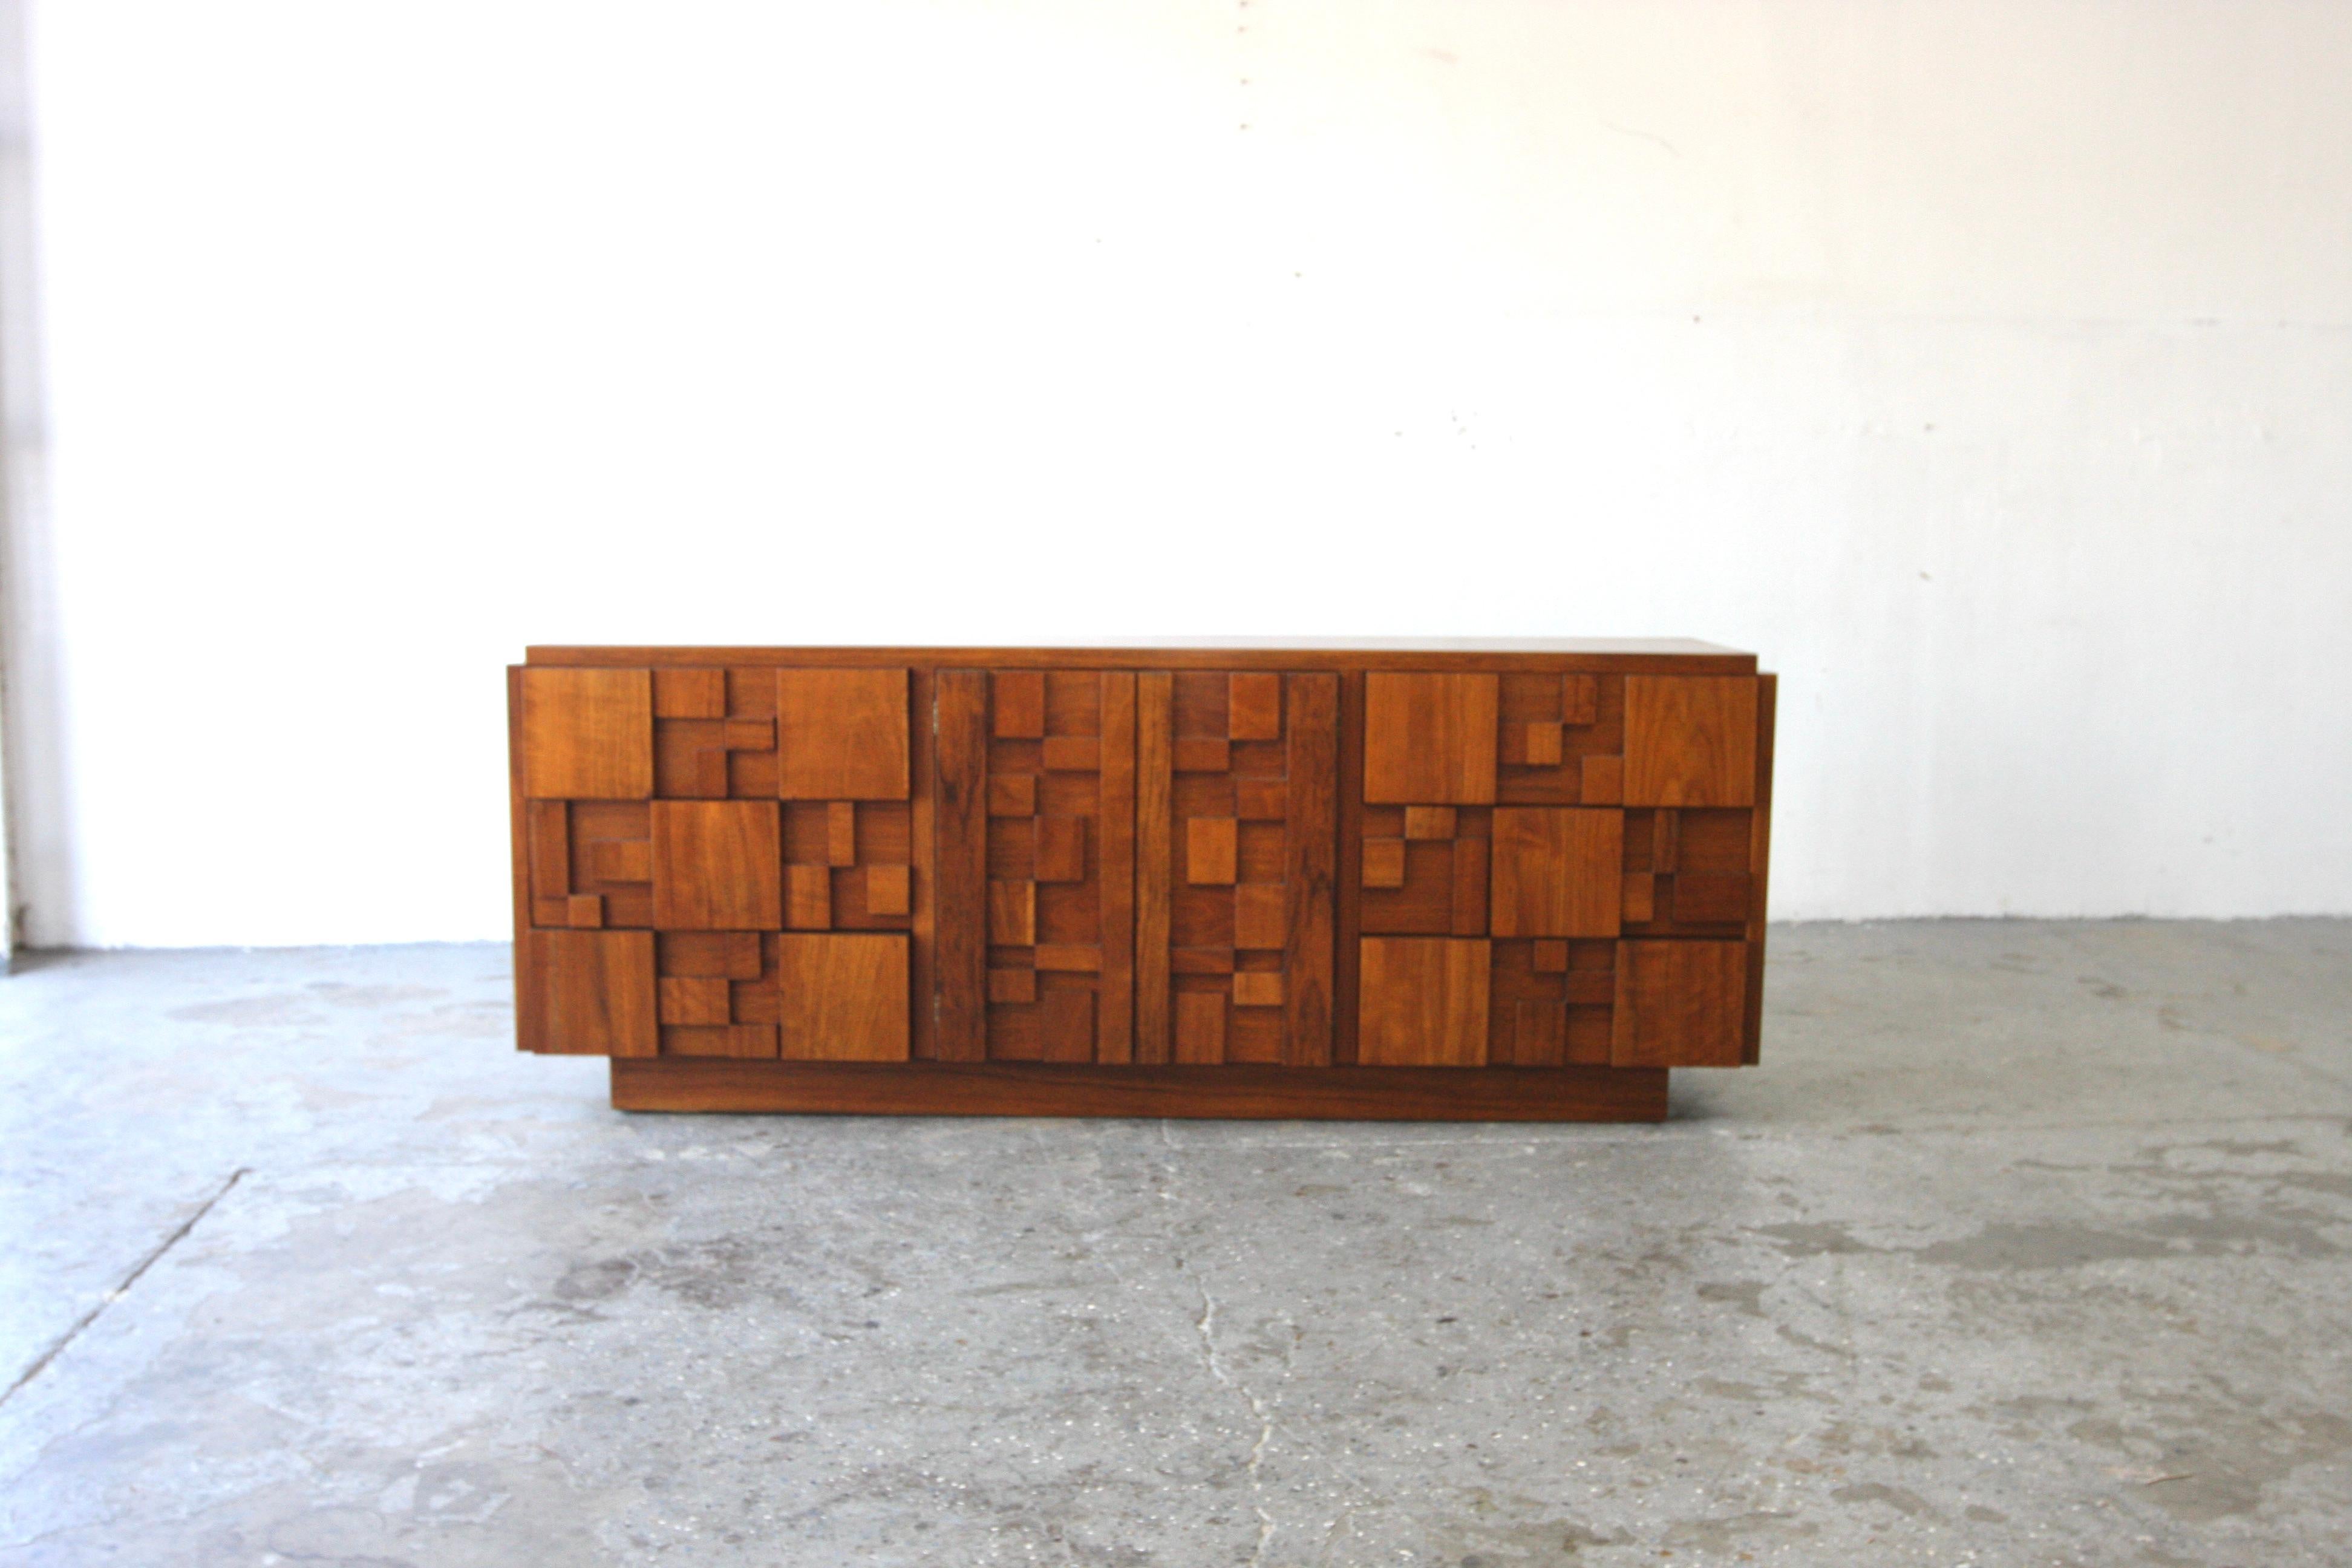 1970s Lane Staccato Mid Century Modern Mosaic Brutalist Lowboy Dresser/ Credenza
Lane Staccato Mosaic Brutalist Dresser / credenza. This beautiful piece has 9 drawers. This is a true statement piece.

78 inches long 19 inches deep 30 inches high